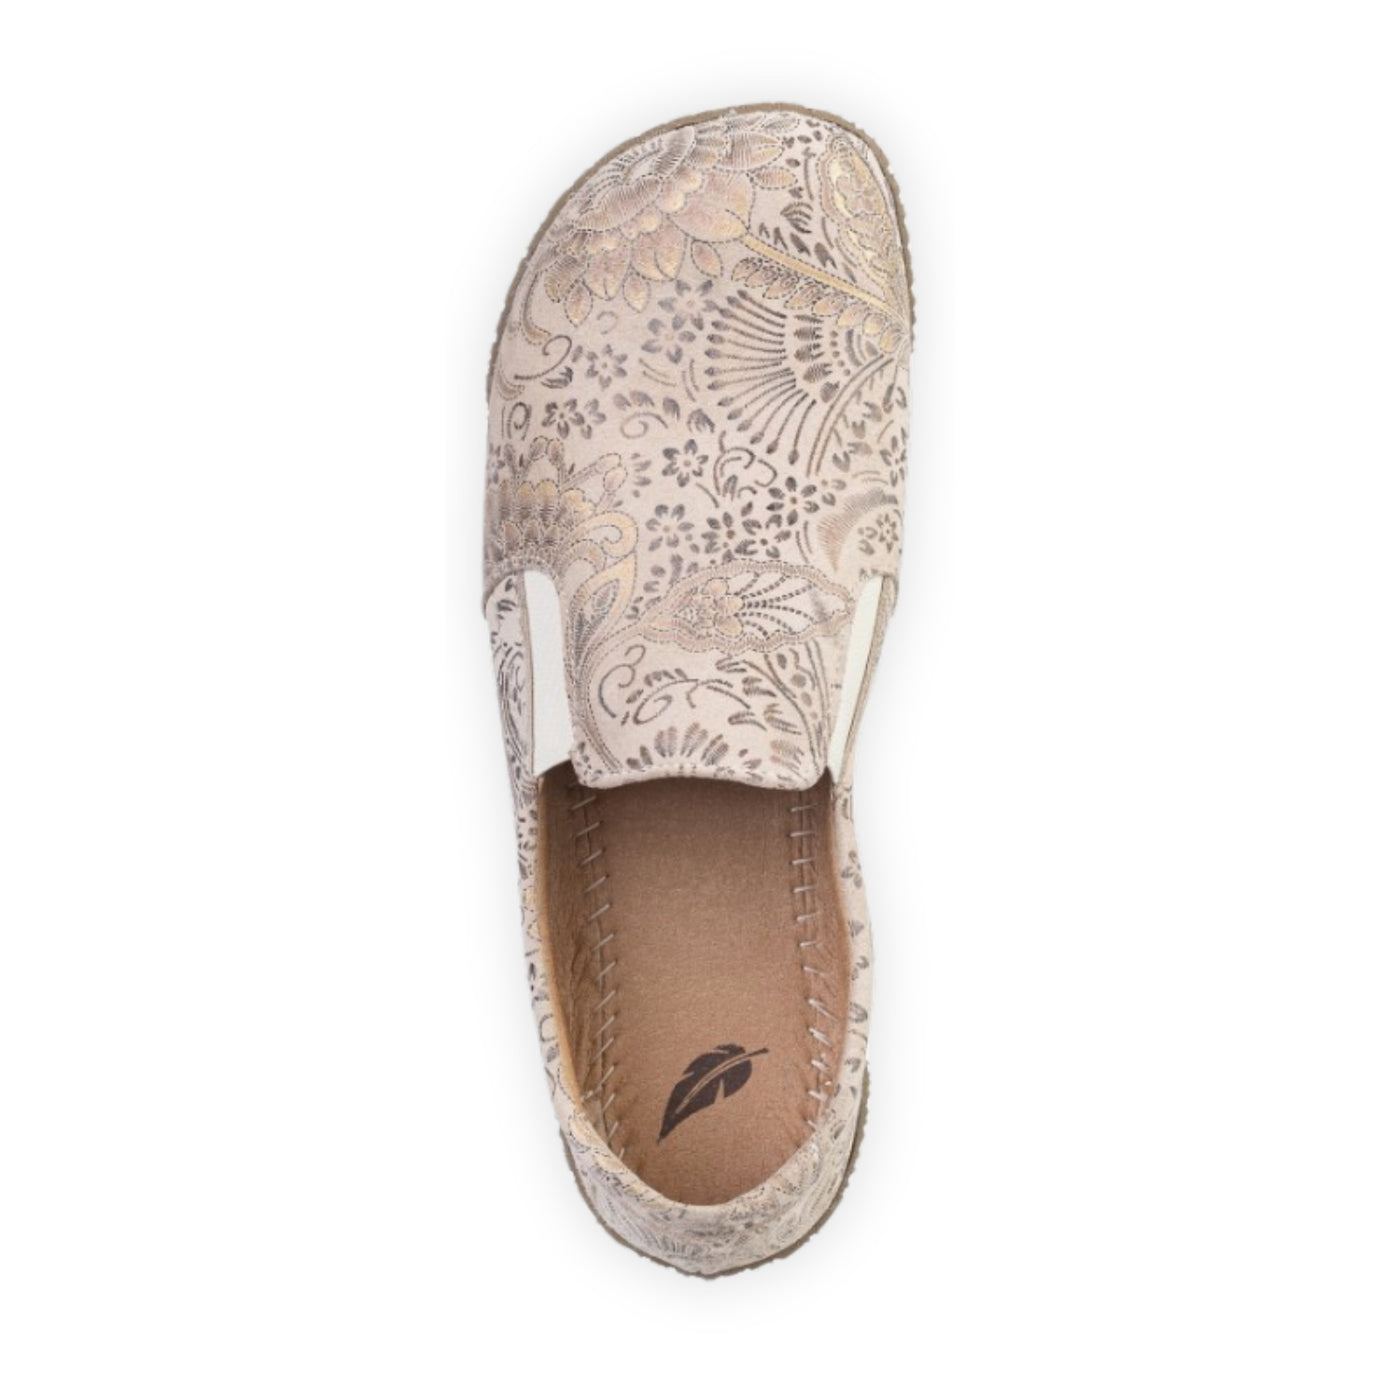 Light tan Peerko Trim leather loafer with a metallic floral pattern, tan rubber soles, and two small elastic pannels. Left shoe is shown from above on a white background. #color_savana